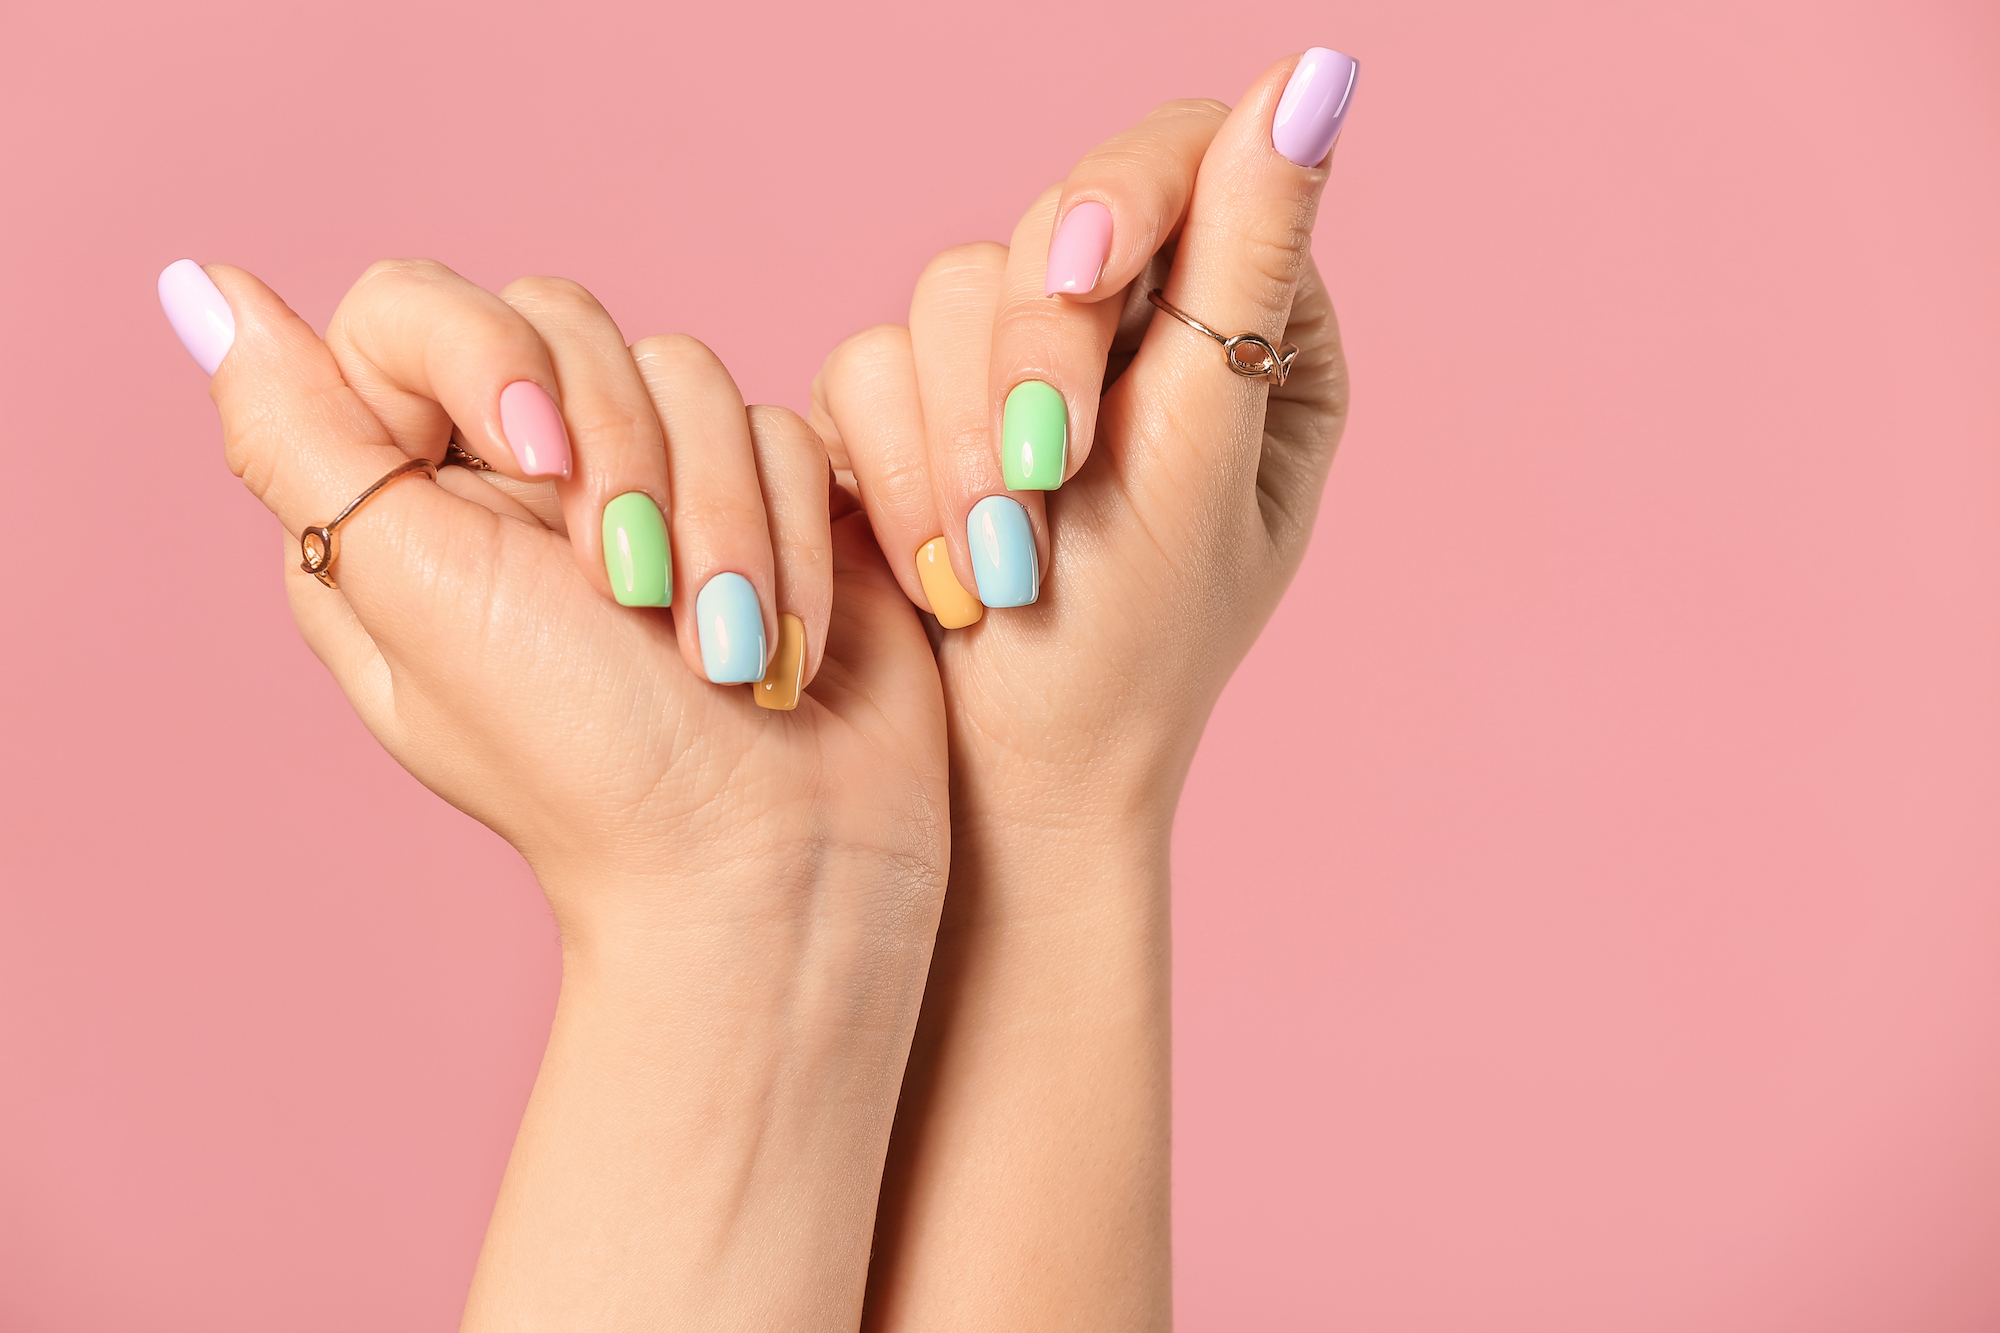 3. Age-Appropriate Nail Art Ideas for Mature Women - wide 7